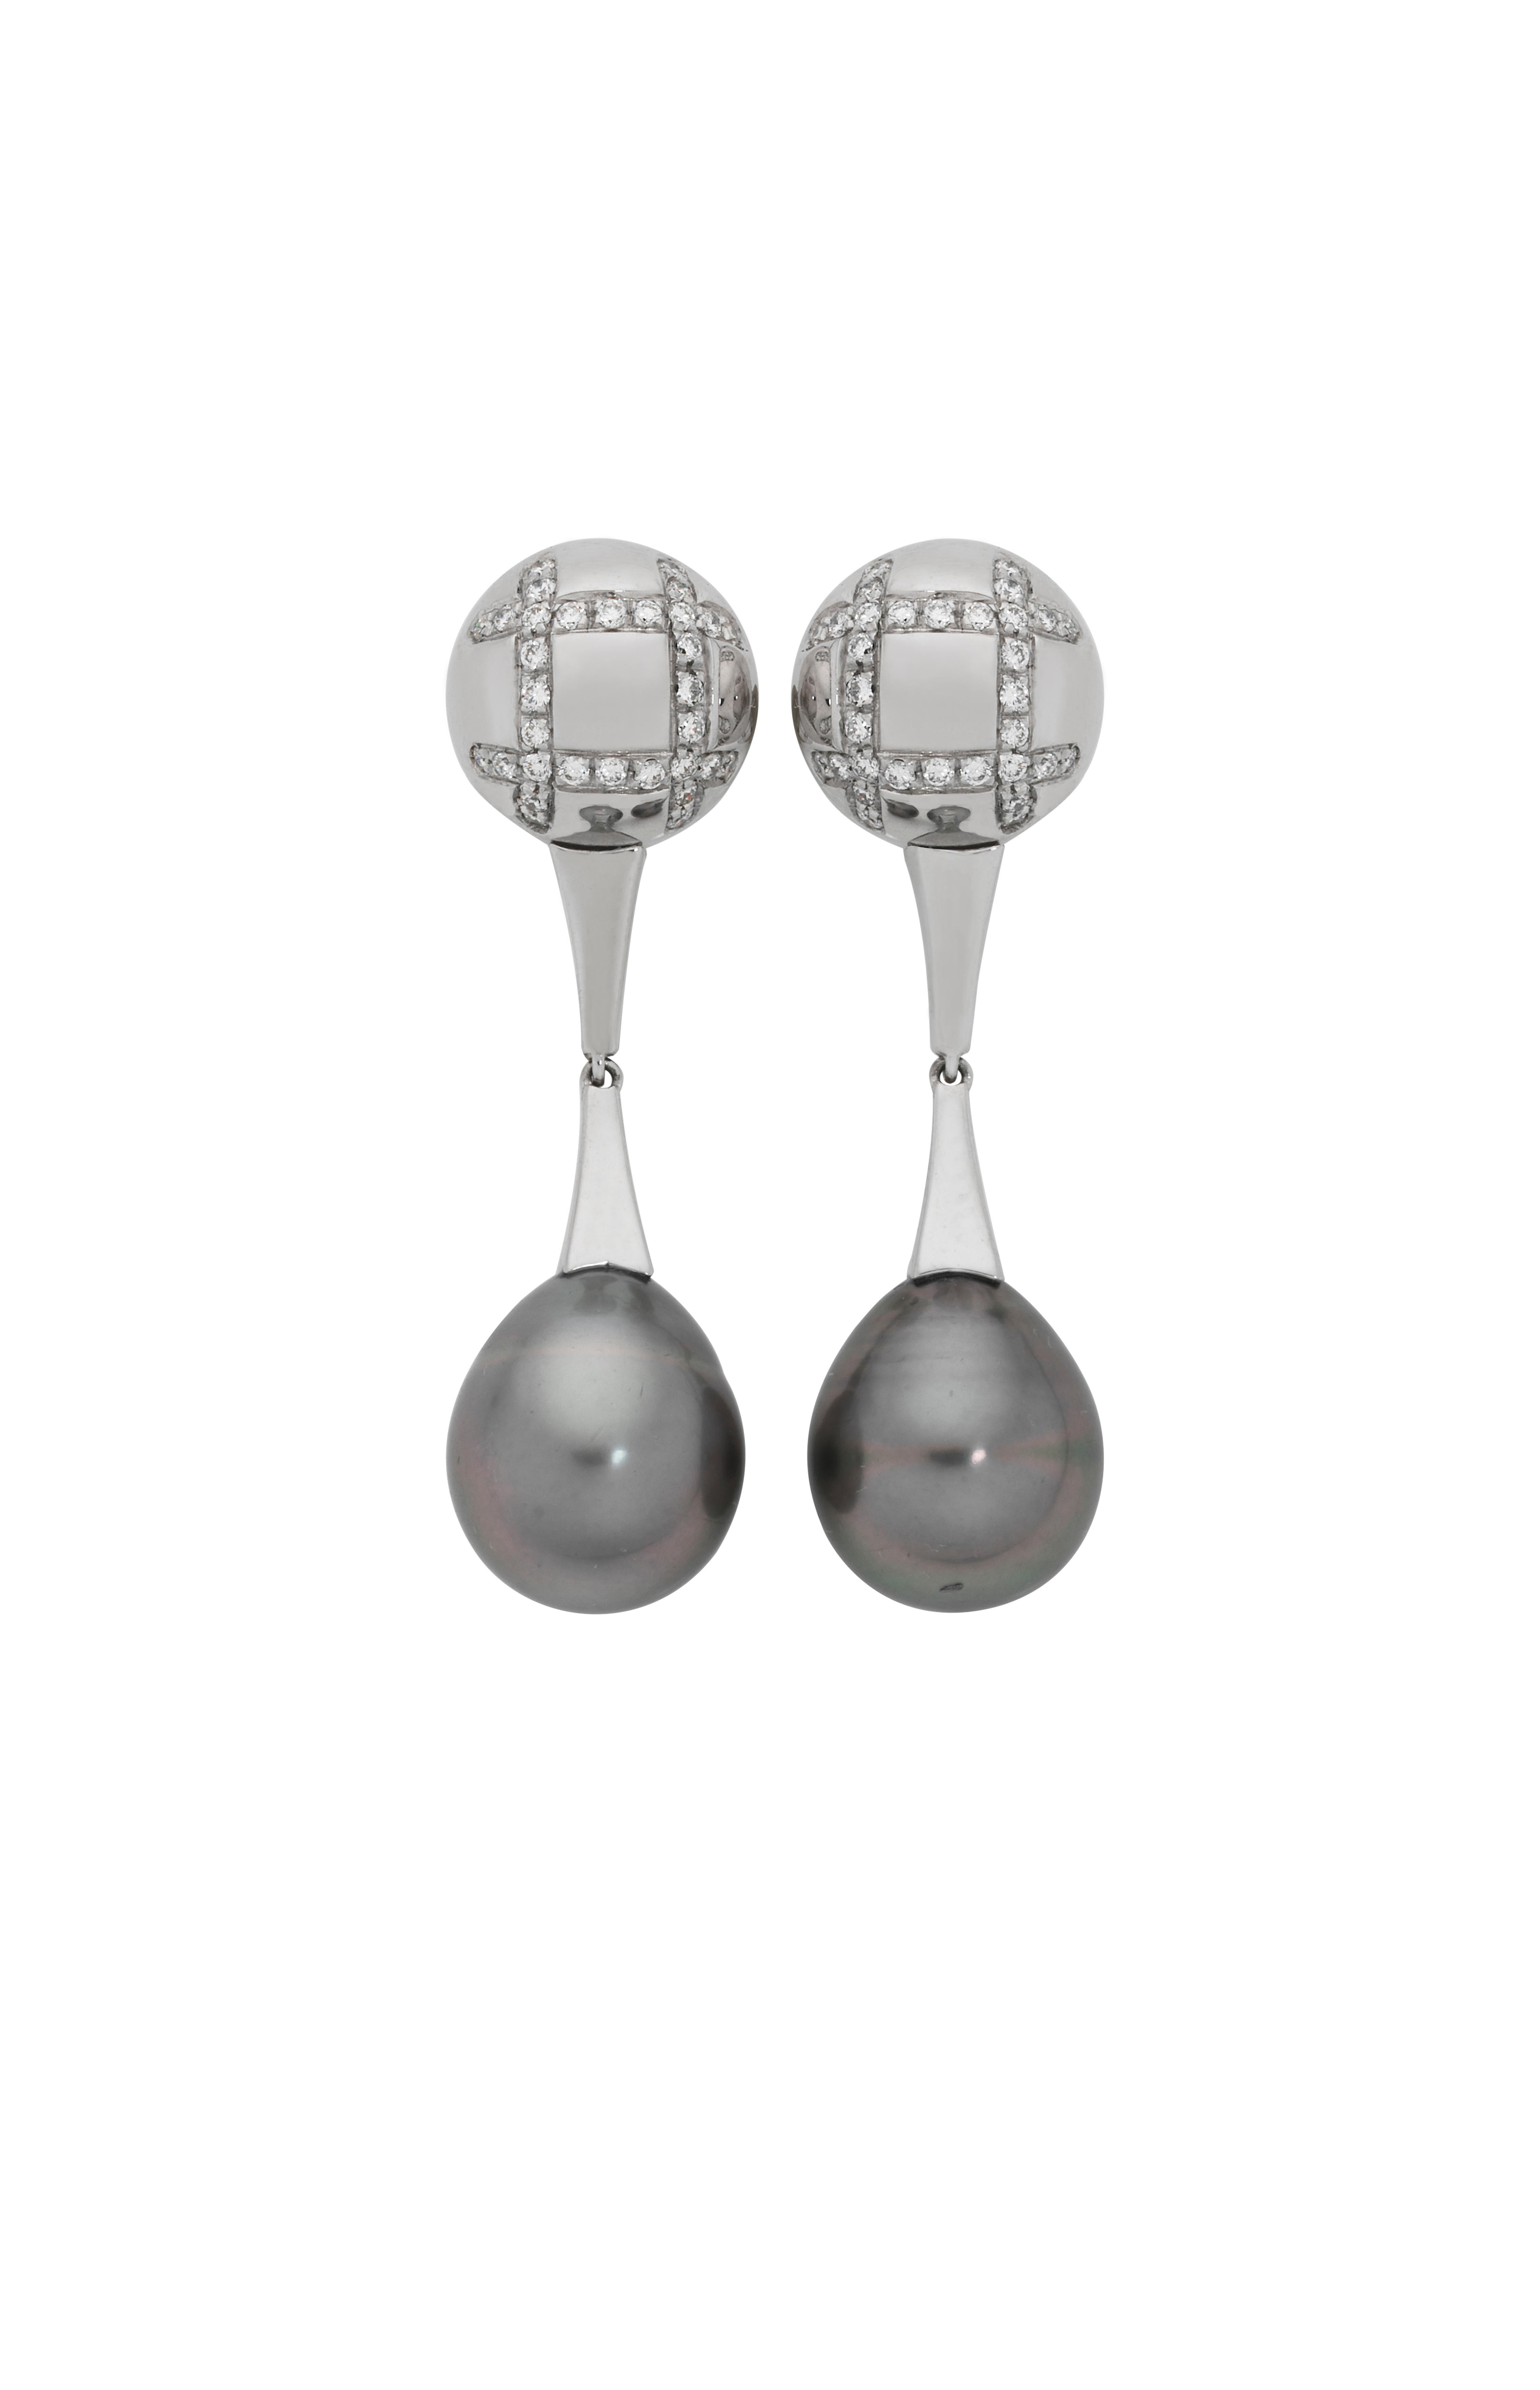 Giulians Art Deco inspired 18k white gold handcrafted Tahitian black cultured South Sea pearl and diamond drop Earrings. Each earring features a 12mm drop shape Tahitian cultured South Sea Pearl, with soft grey and aubergine hues.  The 18 karat